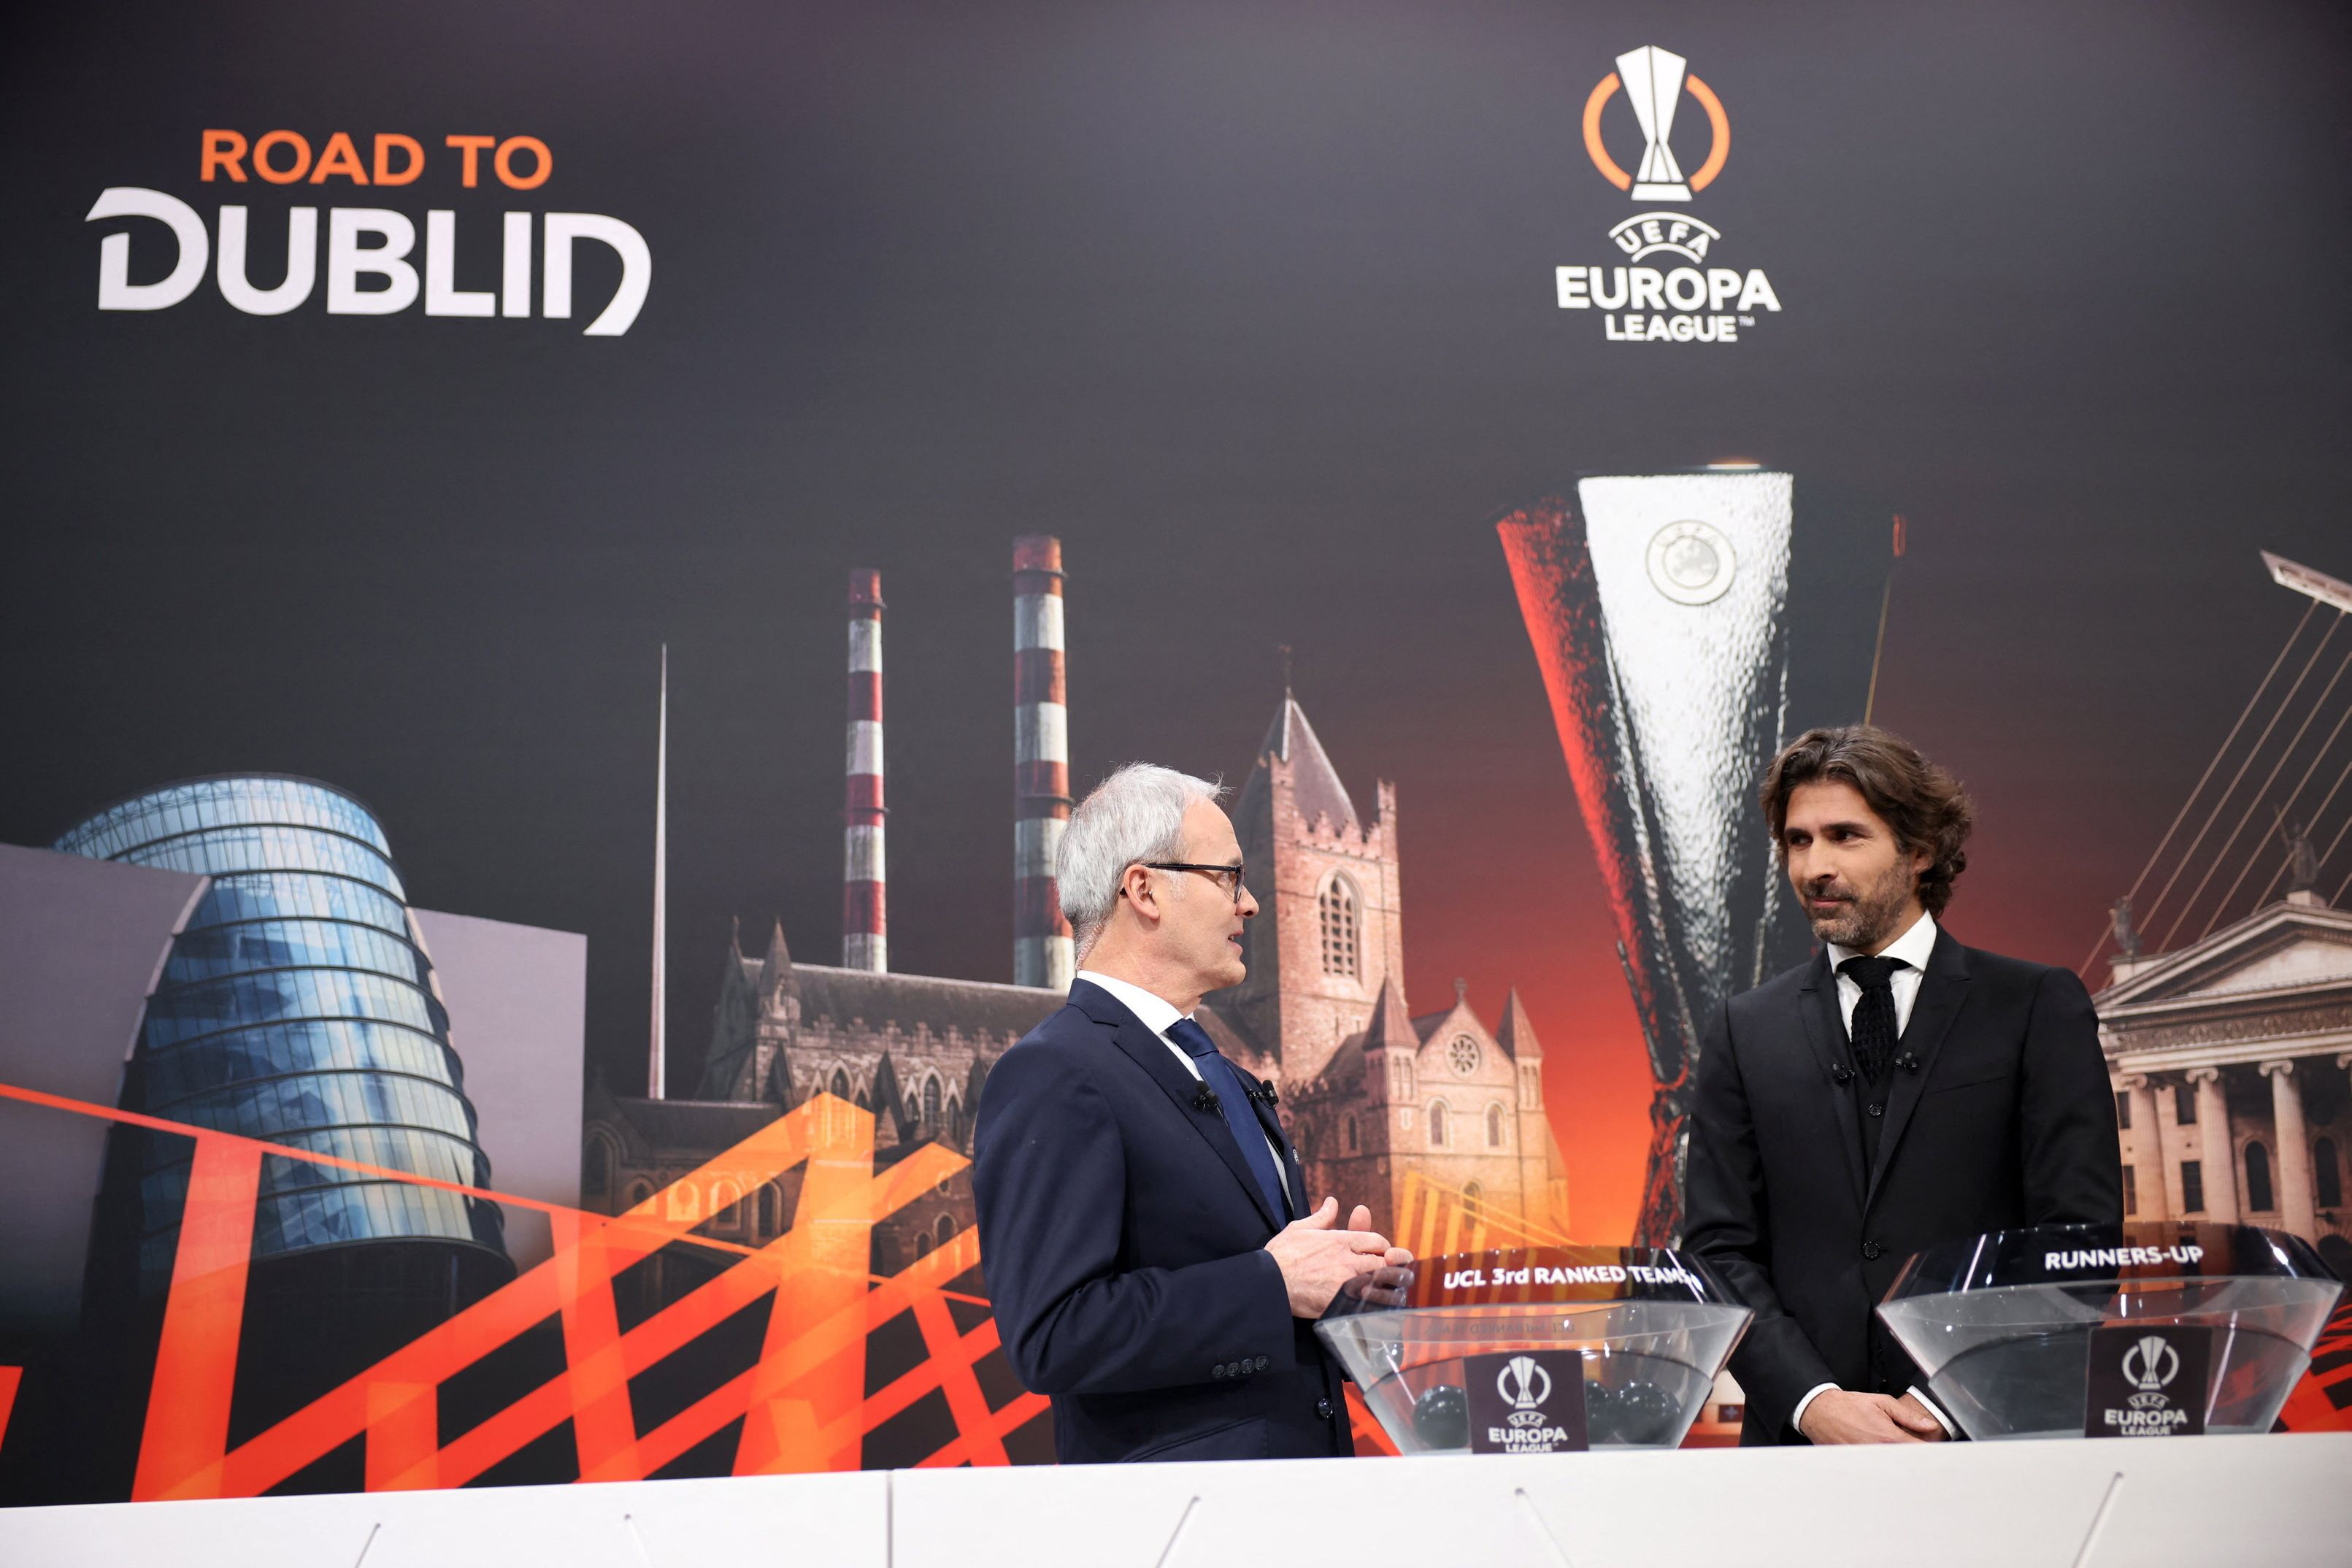 Europa League: Jose Mourinho's Roma to face Feyenoord in play-off round –  British sides already in last 16